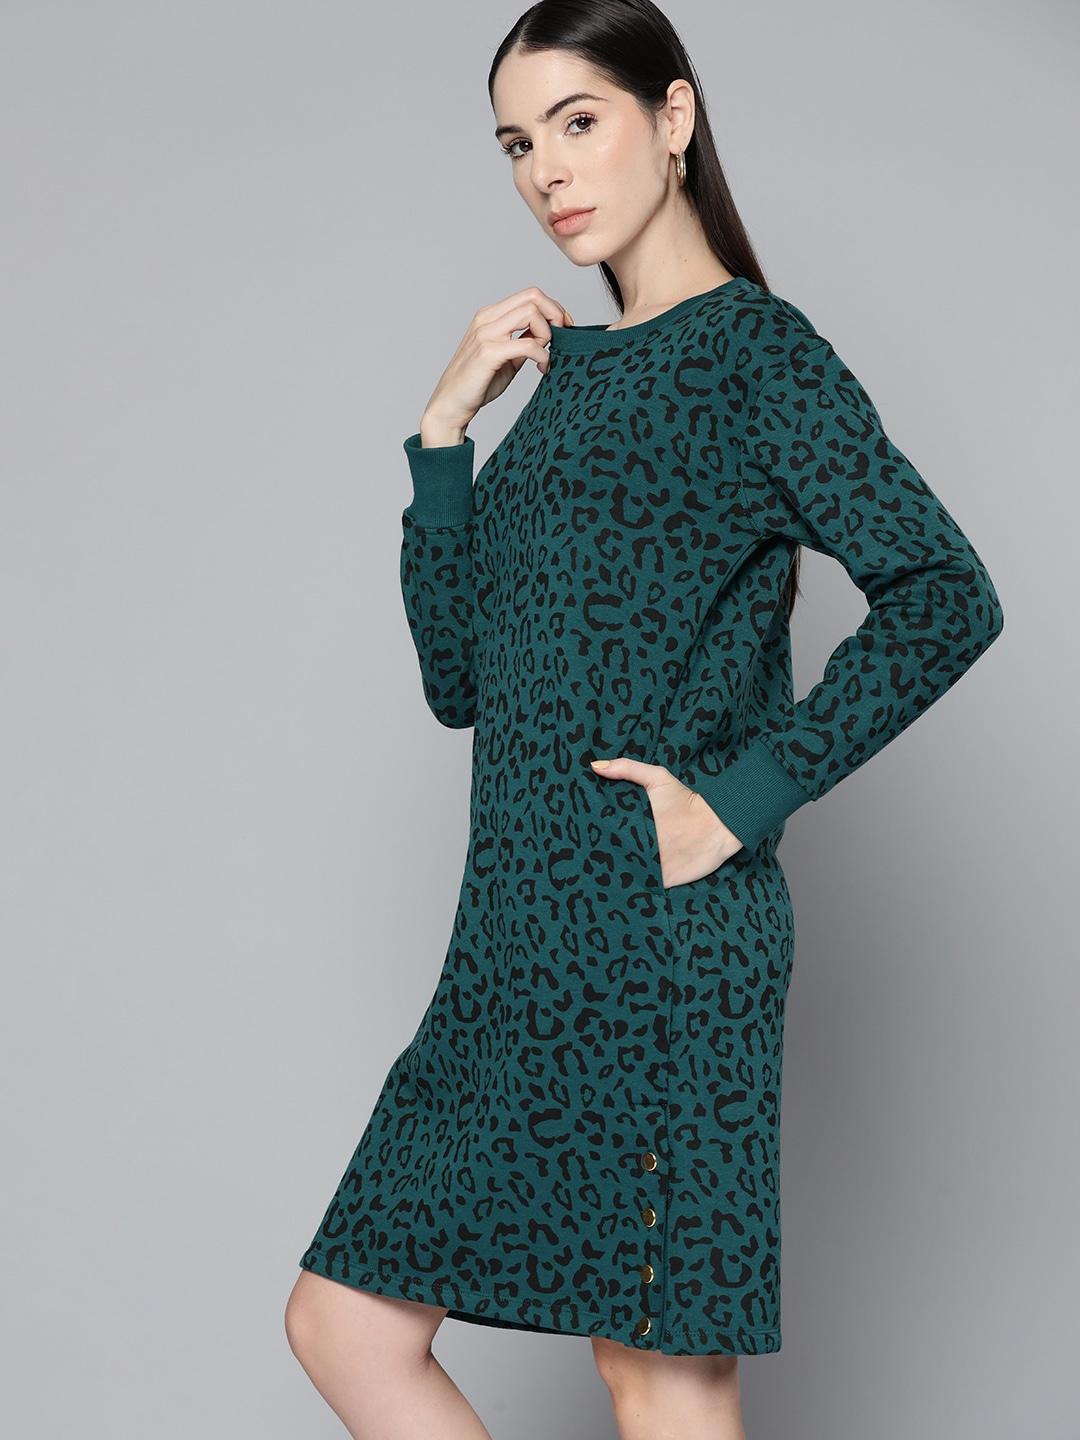 chemistry teal green animal print button detail sweater dress